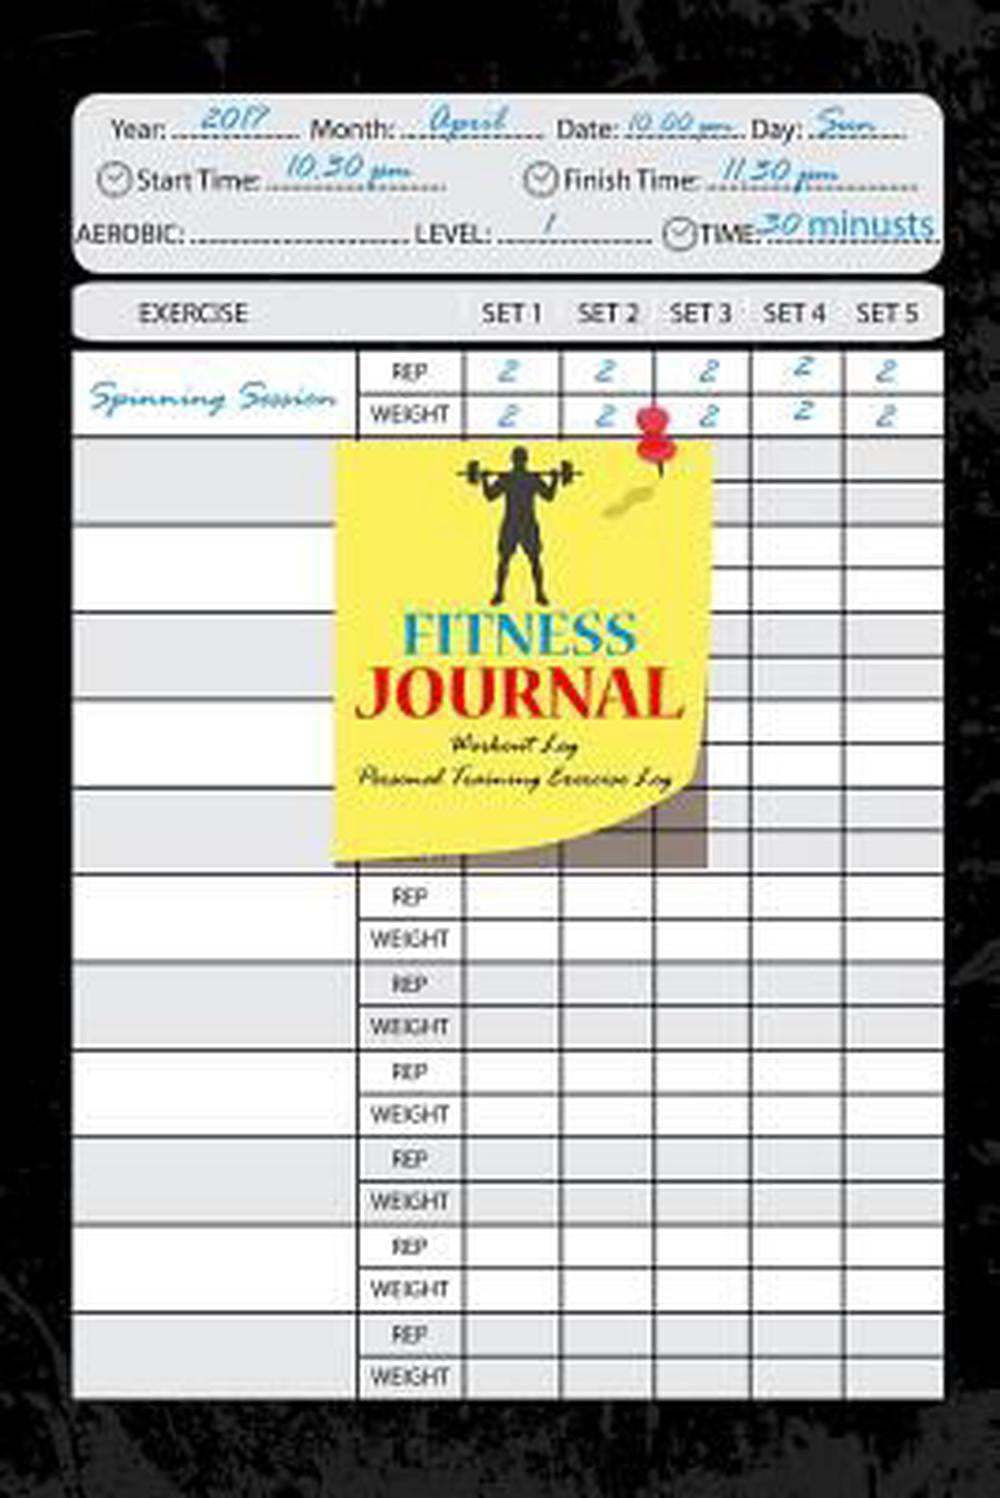 Fitness Journal:Workout Log:Personal Training Exercise Log